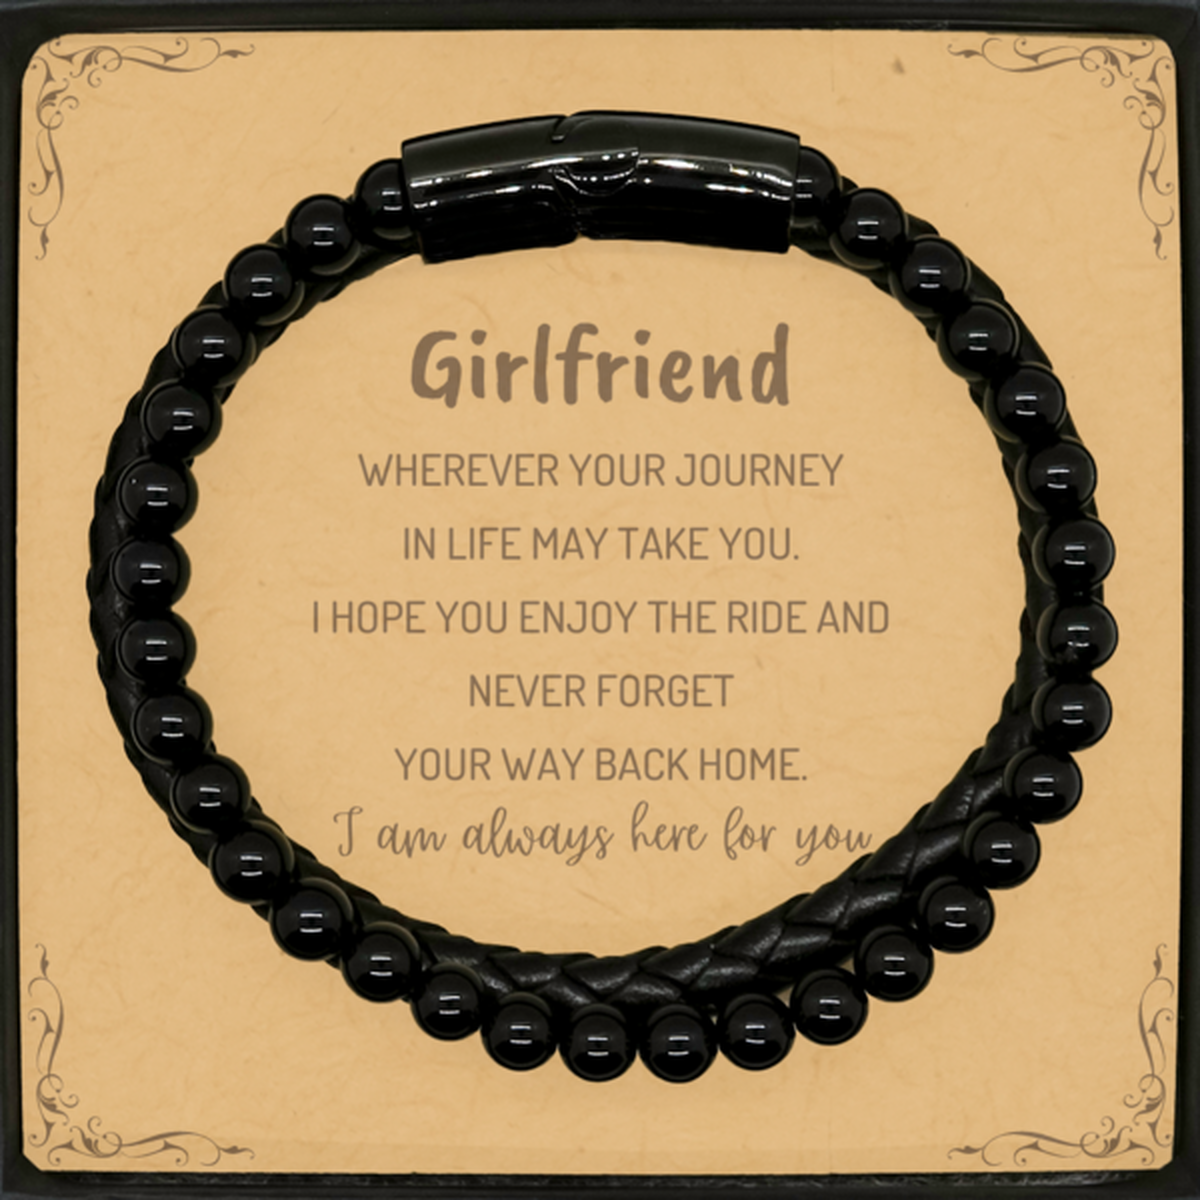 Girlfriend wherever your journey in life may take you, I am always here for you Girlfriend Stone Leather Bracelets, Awesome Christmas Gifts For Girlfriend Message Card, Girlfriend Birthday Gifts for Men Women Family Loved One